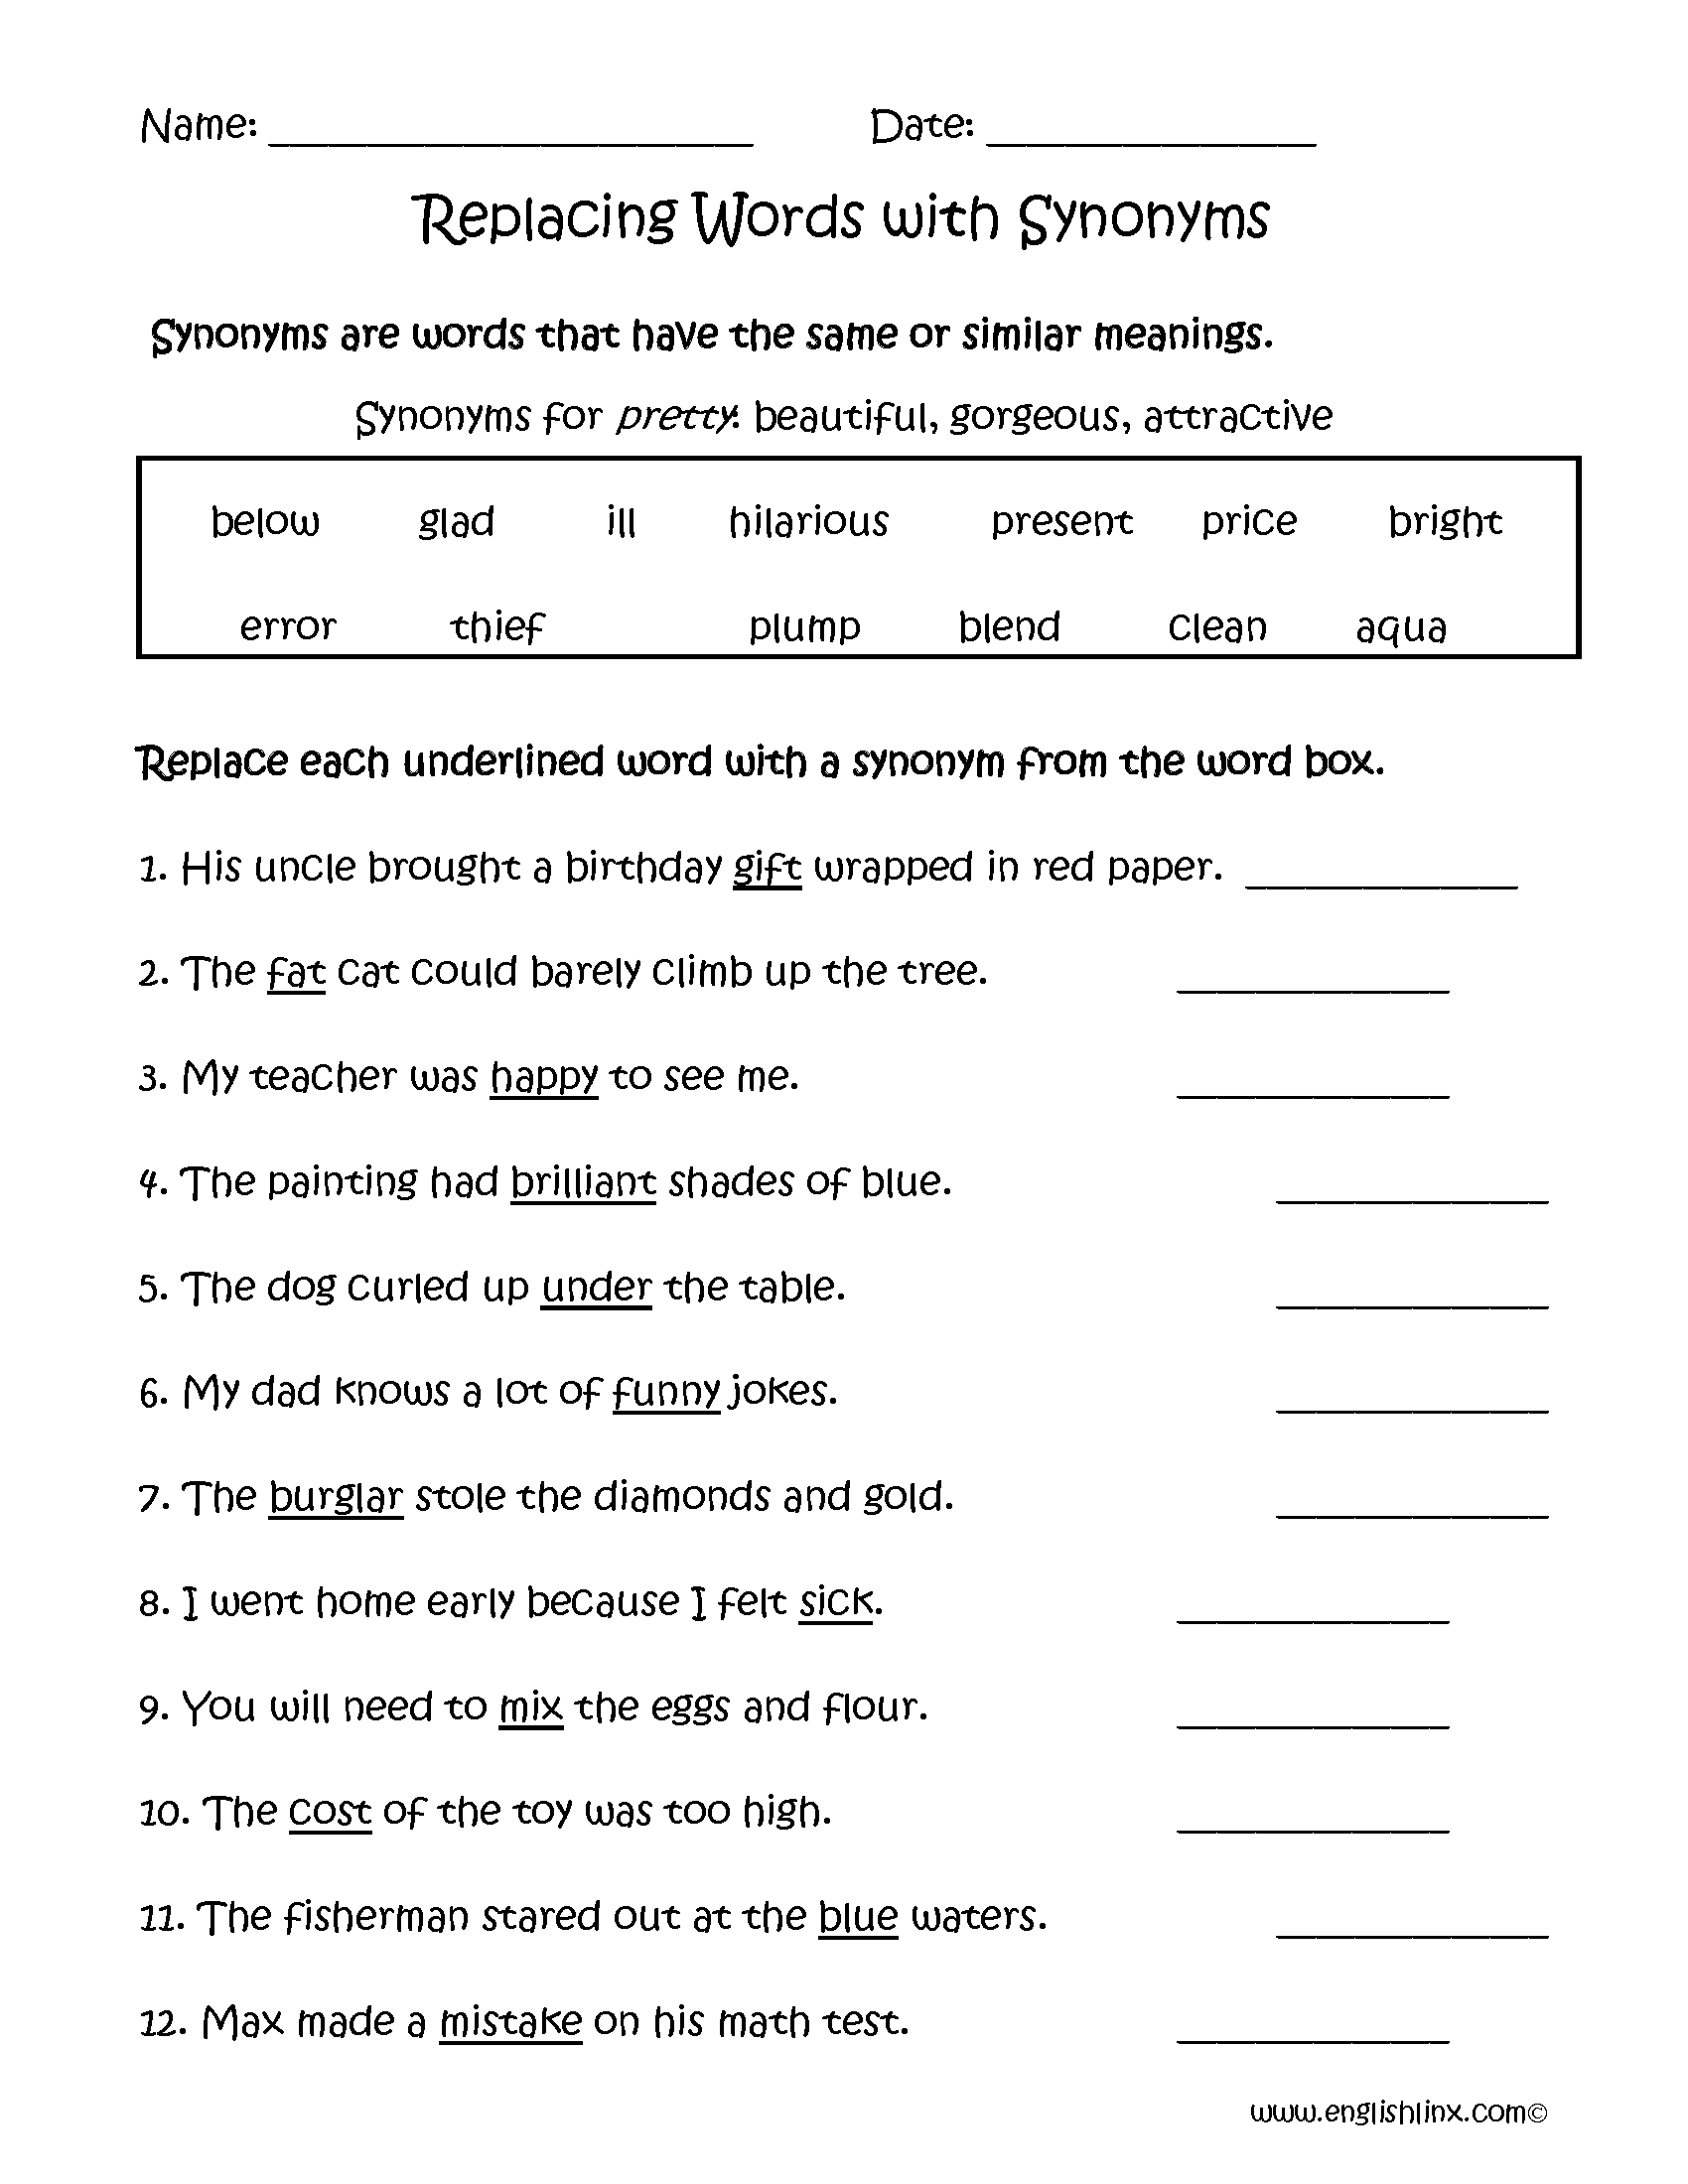 synonyms-worksheets-replacing-words-with-synonyms-worksheets